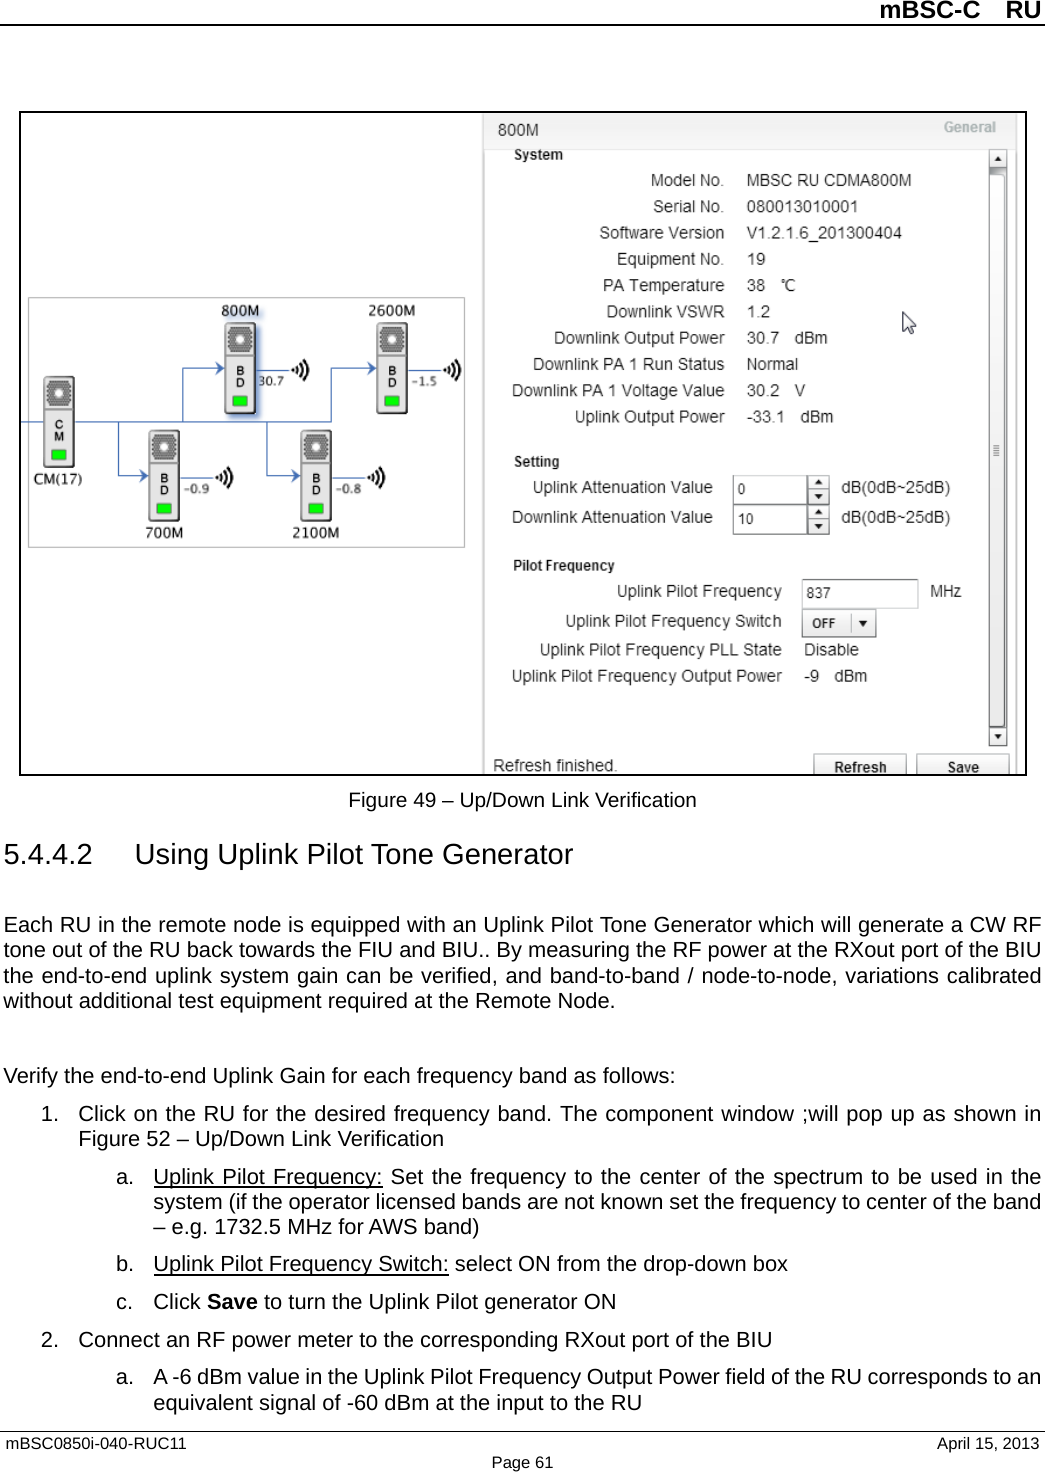          mBSC-C  RU   mBSC0850i-040-RUC11                                April 15, 2013 Page 61  Figure 49 – Up/Down Link Verification 5.4.4.2 Using Uplink Pilot Tone Generator Each RU in the remote node is equipped with an Uplink Pilot Tone Generator which will generate a CW RF tone out of the RU back towards the FIU and BIU.. By measuring the RF power at the RXout port of the BIU the end-to-end uplink system gain can be verified, and band-to-band / node-to-node, variations calibrated without additional test equipment required at the Remote Node.  Verify the end-to-end Uplink Gain for each frequency band as follows: 1. Click on the RU for the desired frequency band. The component window ;will pop up as shown in Figure 52 – Up/Down Link Verification a. Uplink Pilot Frequency: Set the frequency to the center of the spectrum to be used in the system (if the operator licensed bands are not known set the frequency to center of the band – e.g. 1732.5 MHz for AWS band) b. Uplink Pilot Frequency Switch: select ON from the drop-down box c. Click Save to turn the Uplink Pilot generator ON 2. Connect an RF power meter to the corresponding RXout port of the BIU a. A -6 dBm value in the Uplink Pilot Frequency Output Power field of the RU corresponds to an equivalent signal of -60 dBm at the input to the RU 